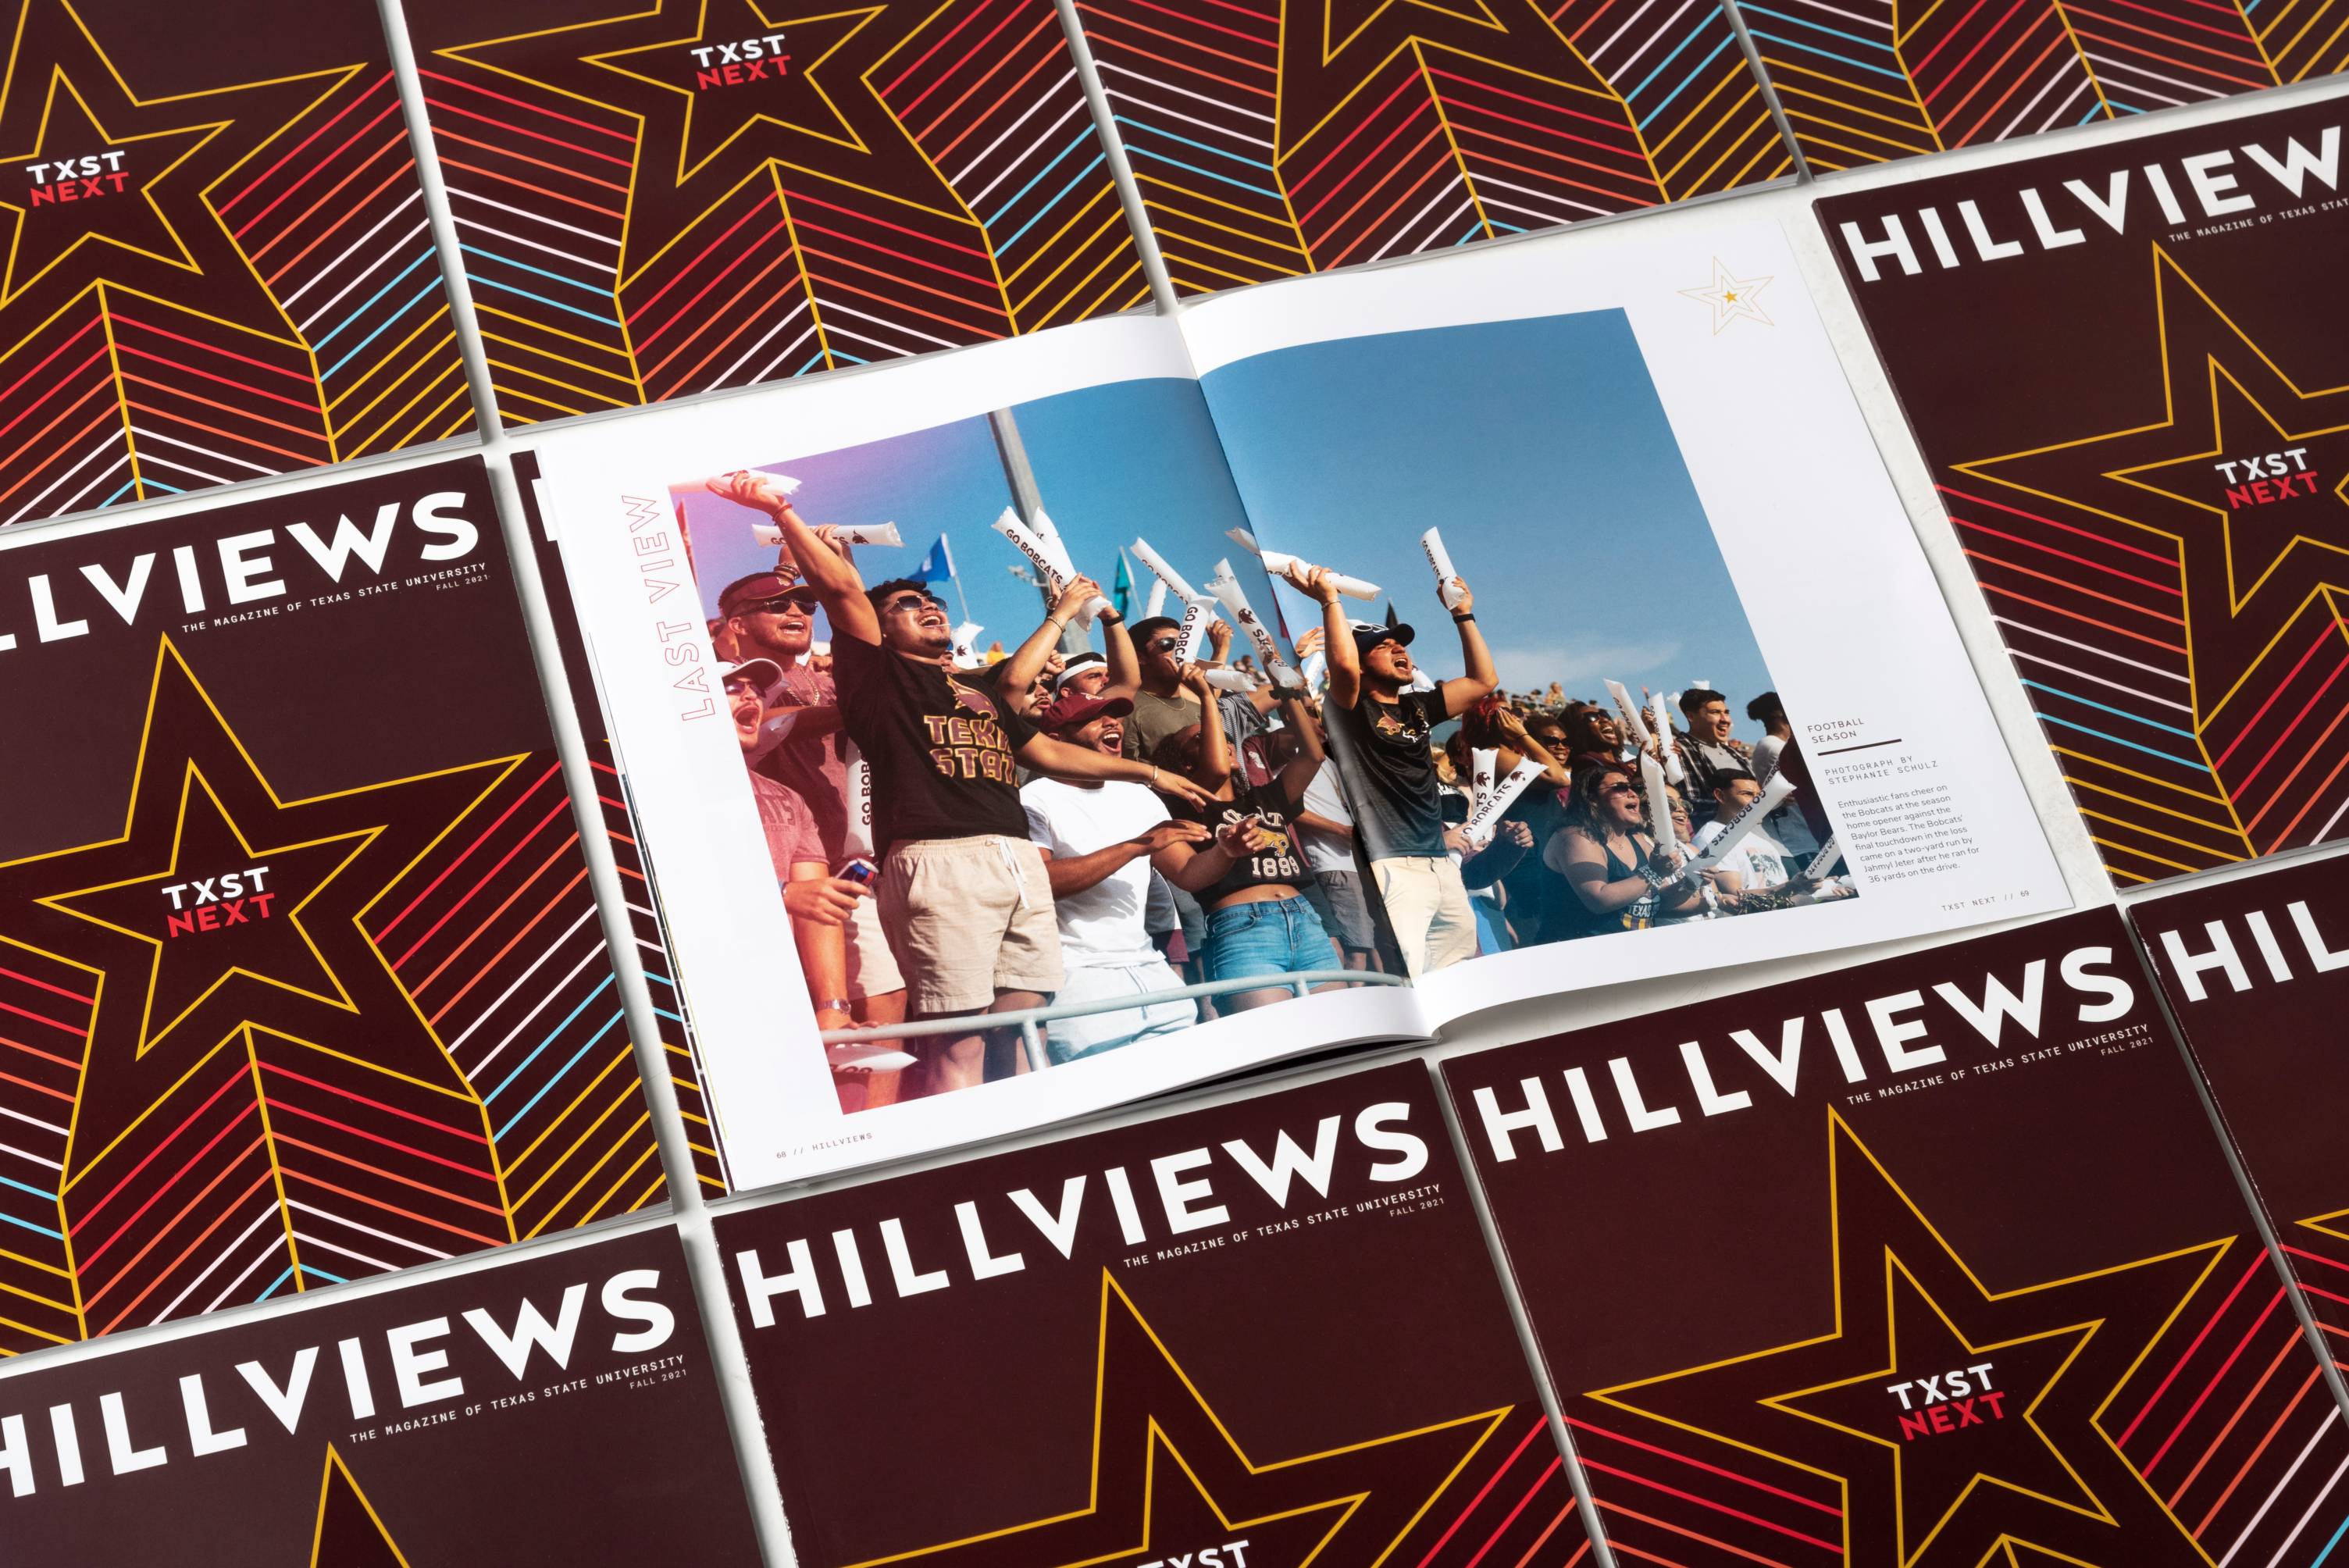 Grid of Hillviews magazine covers with the center issue open to a two-page photo of football fans